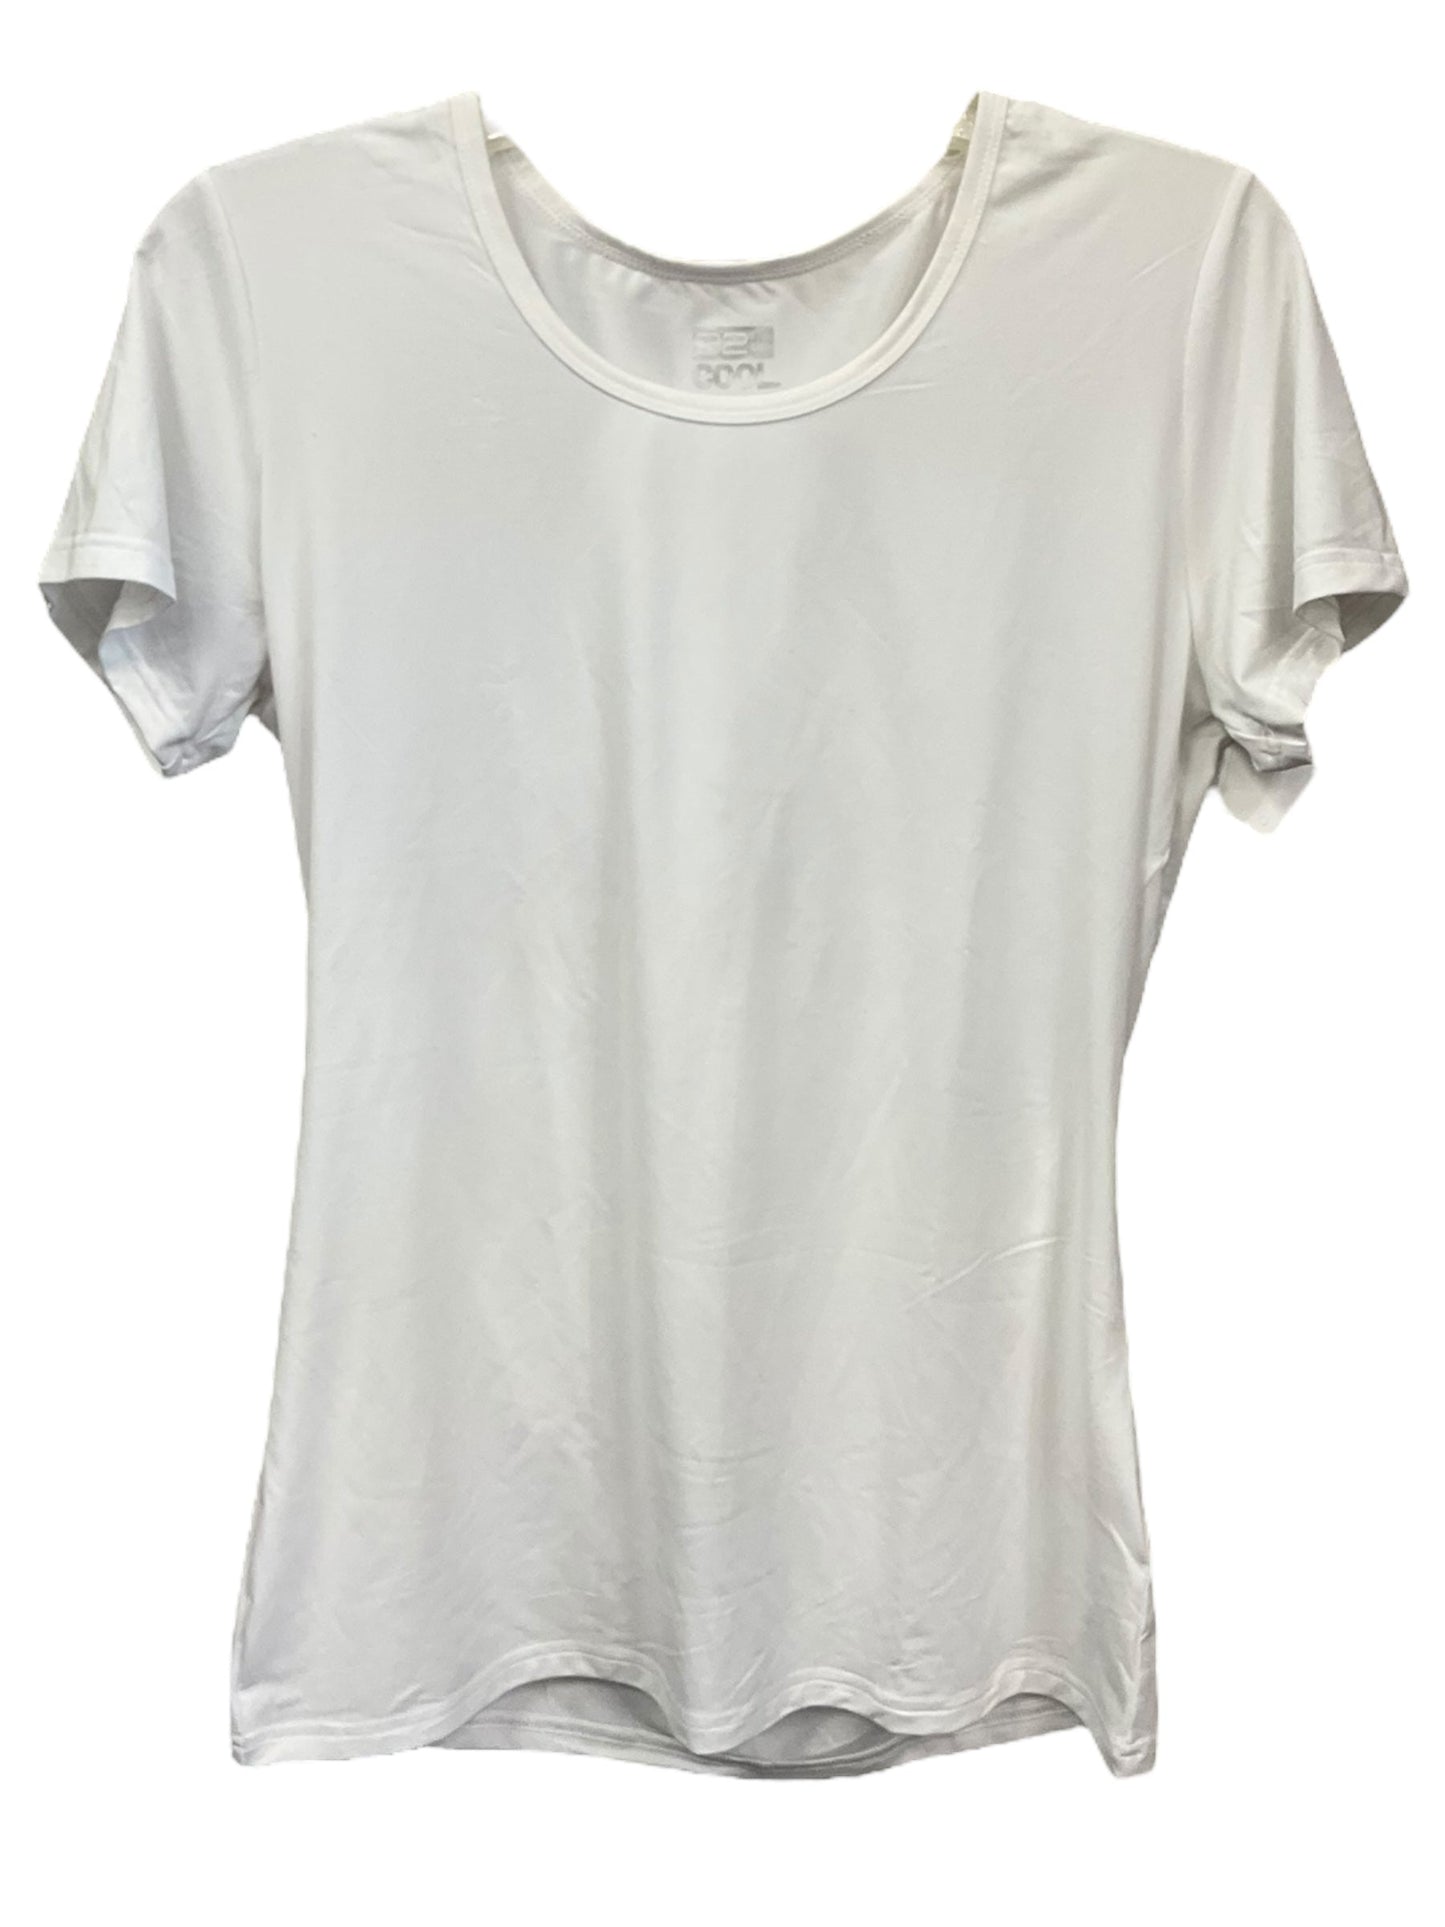 White Athletic Top Short Sleeve 32 Degrees, Size M